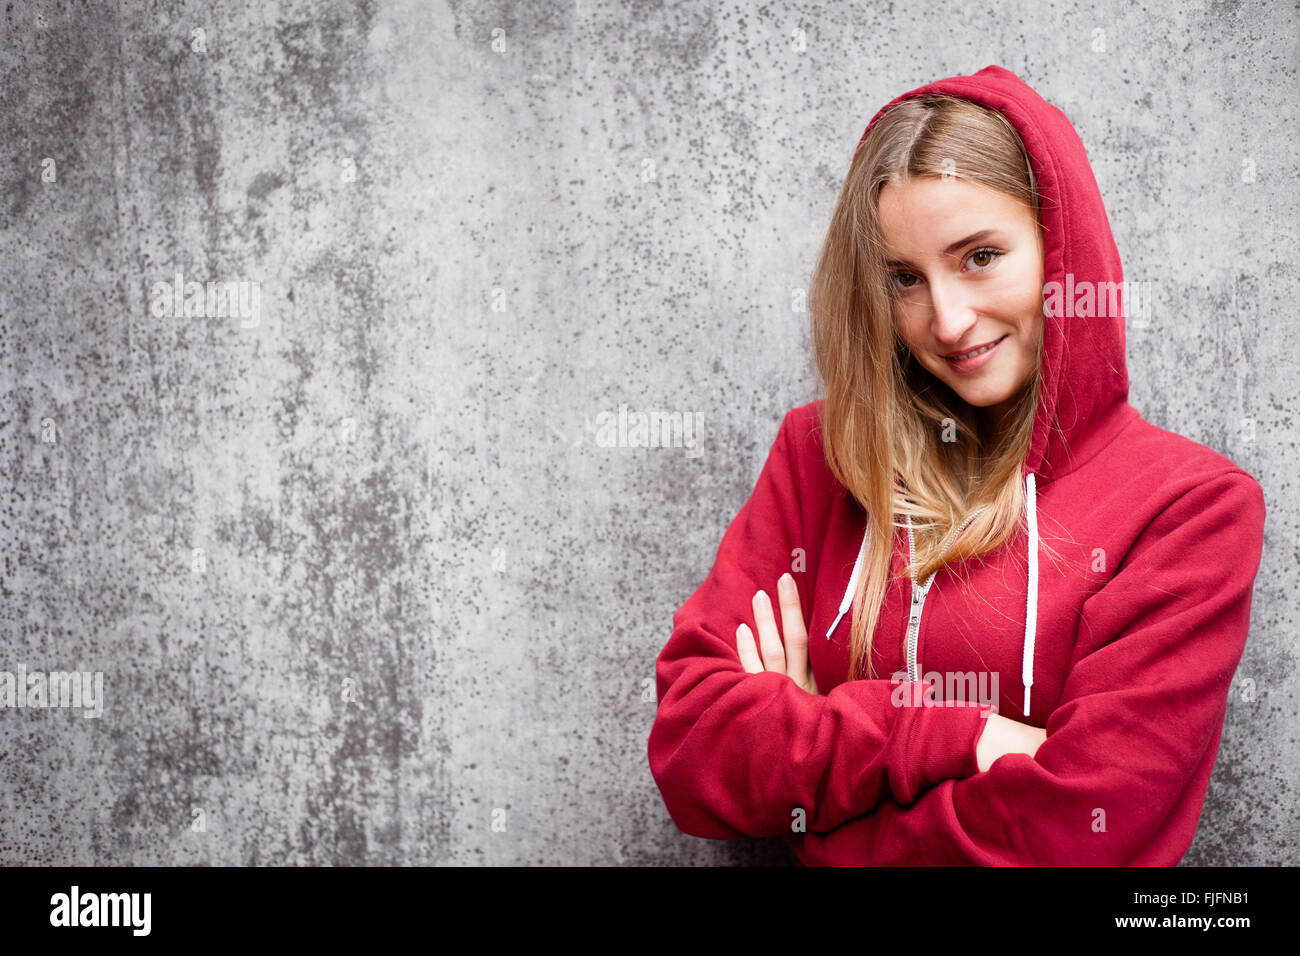 Attractive young woman wearing red hoodie Stock Photo